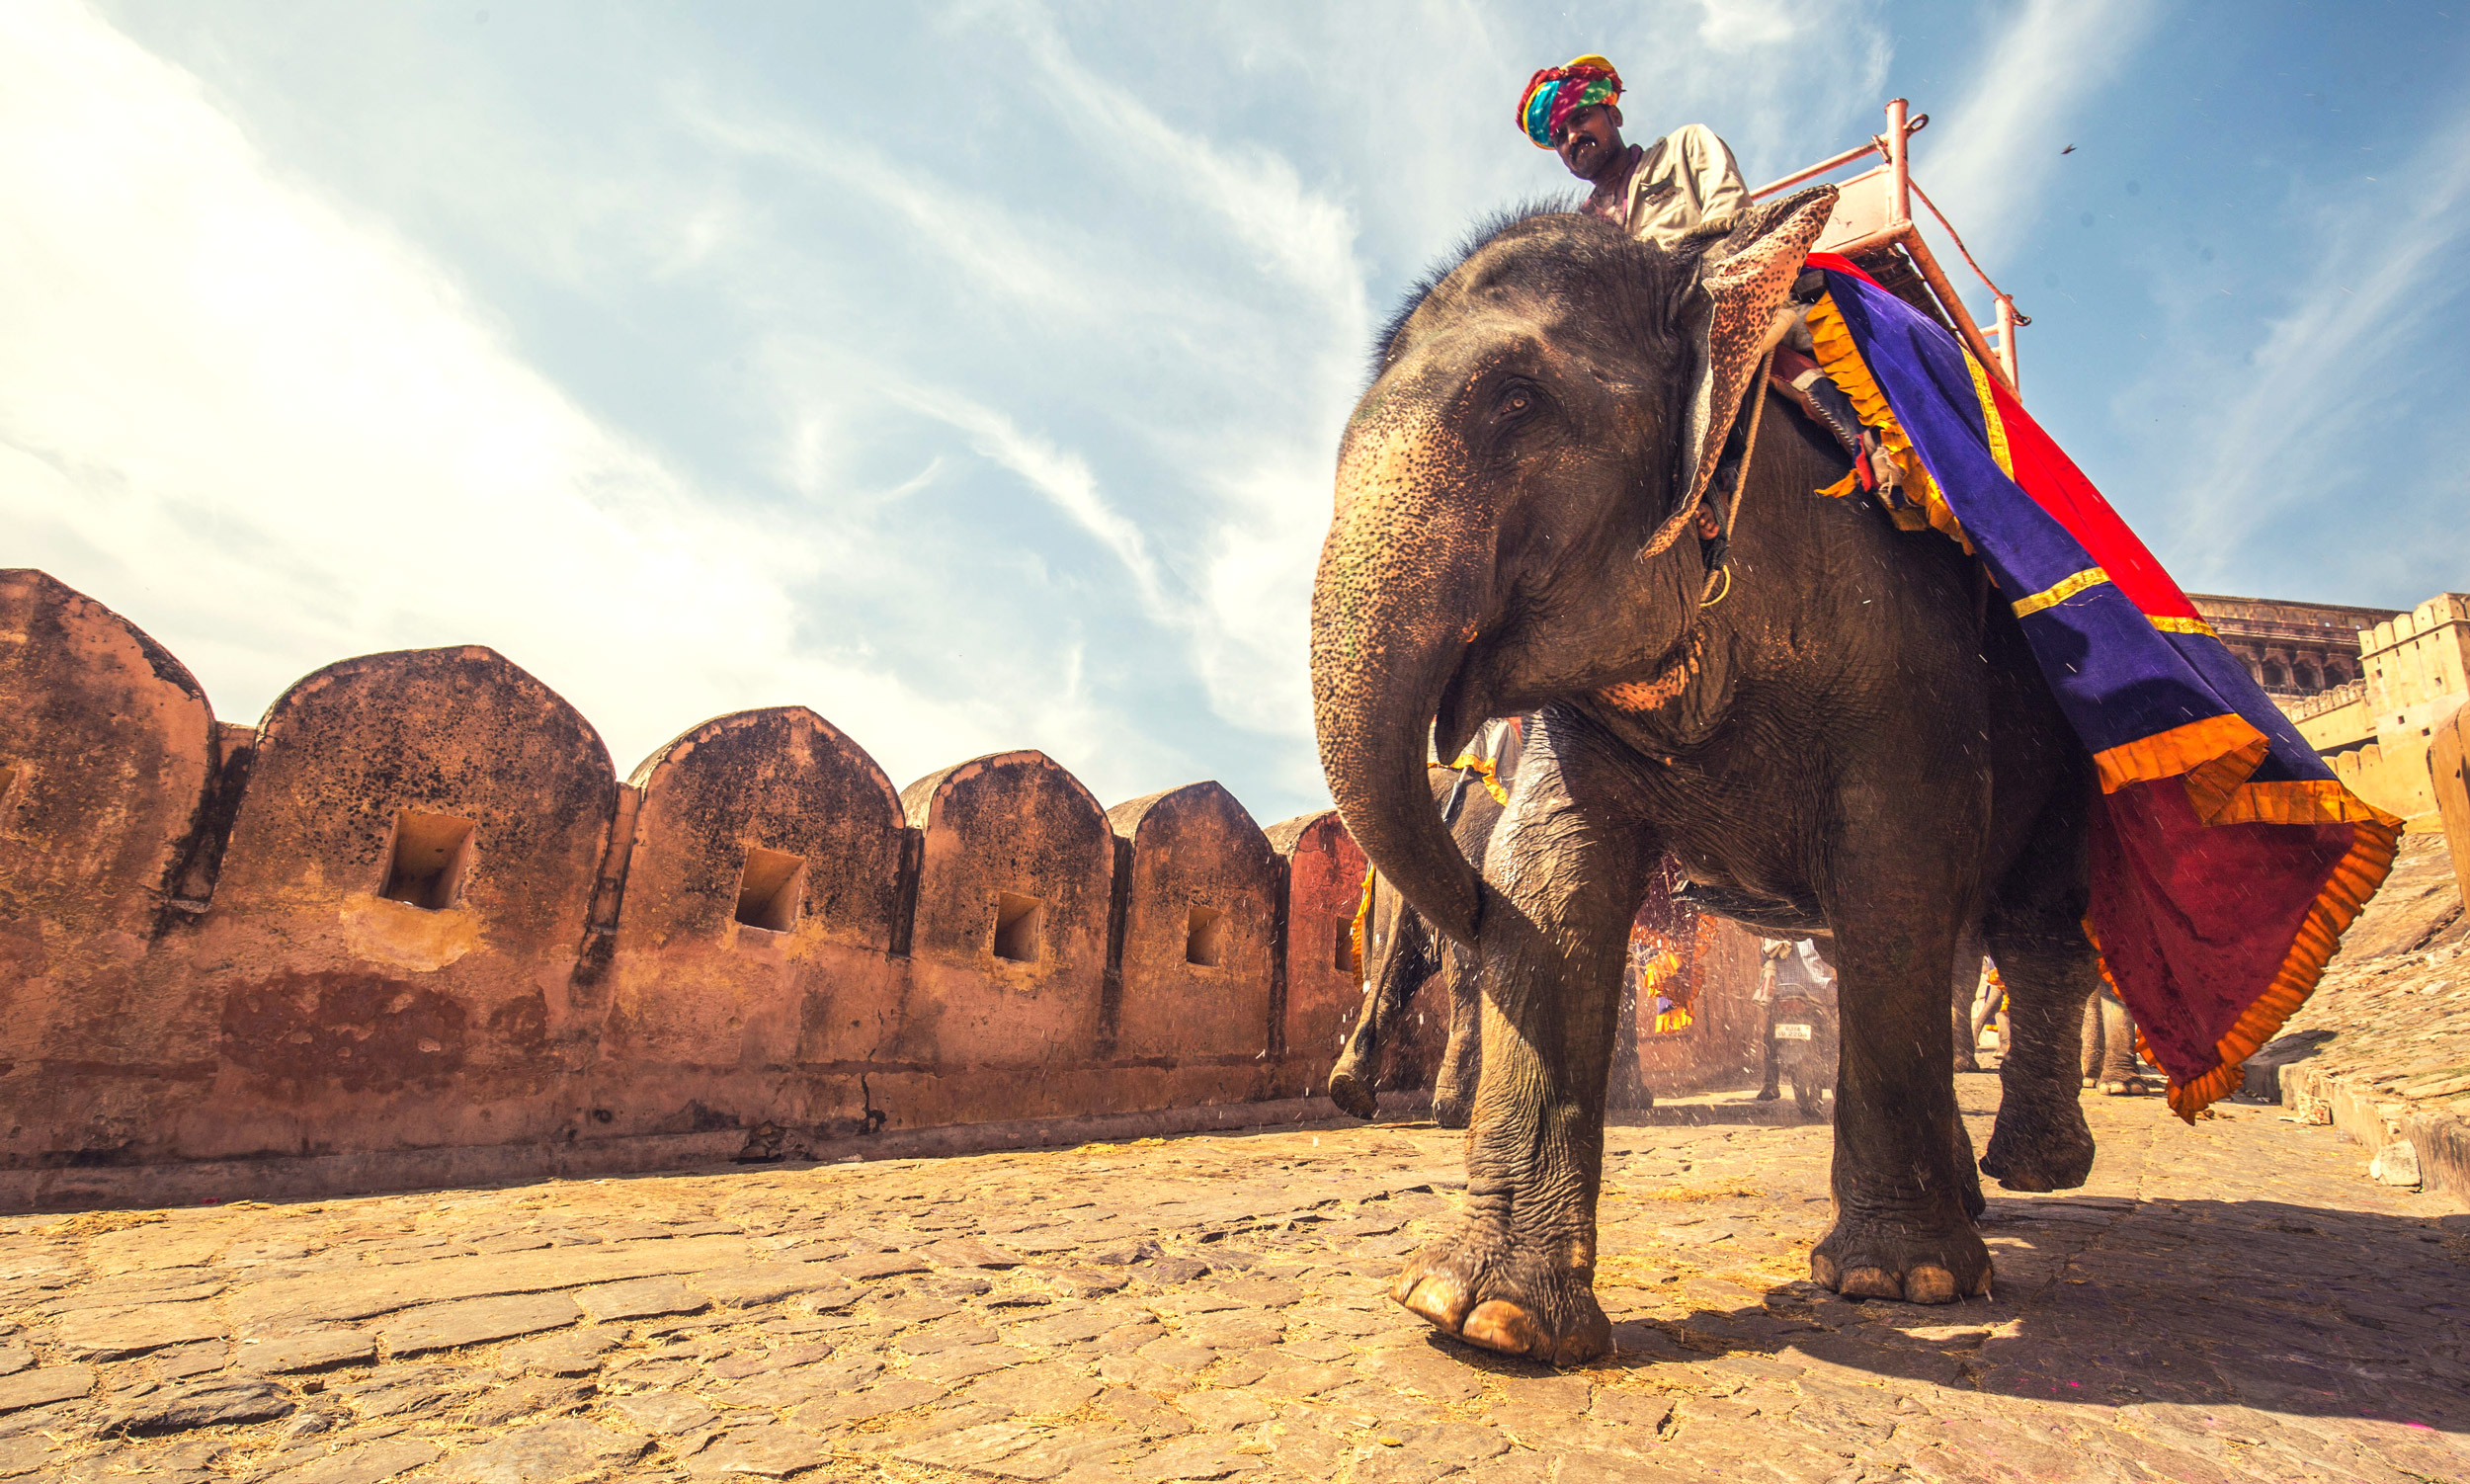 Copy of Elephant taxi, Amber Fort